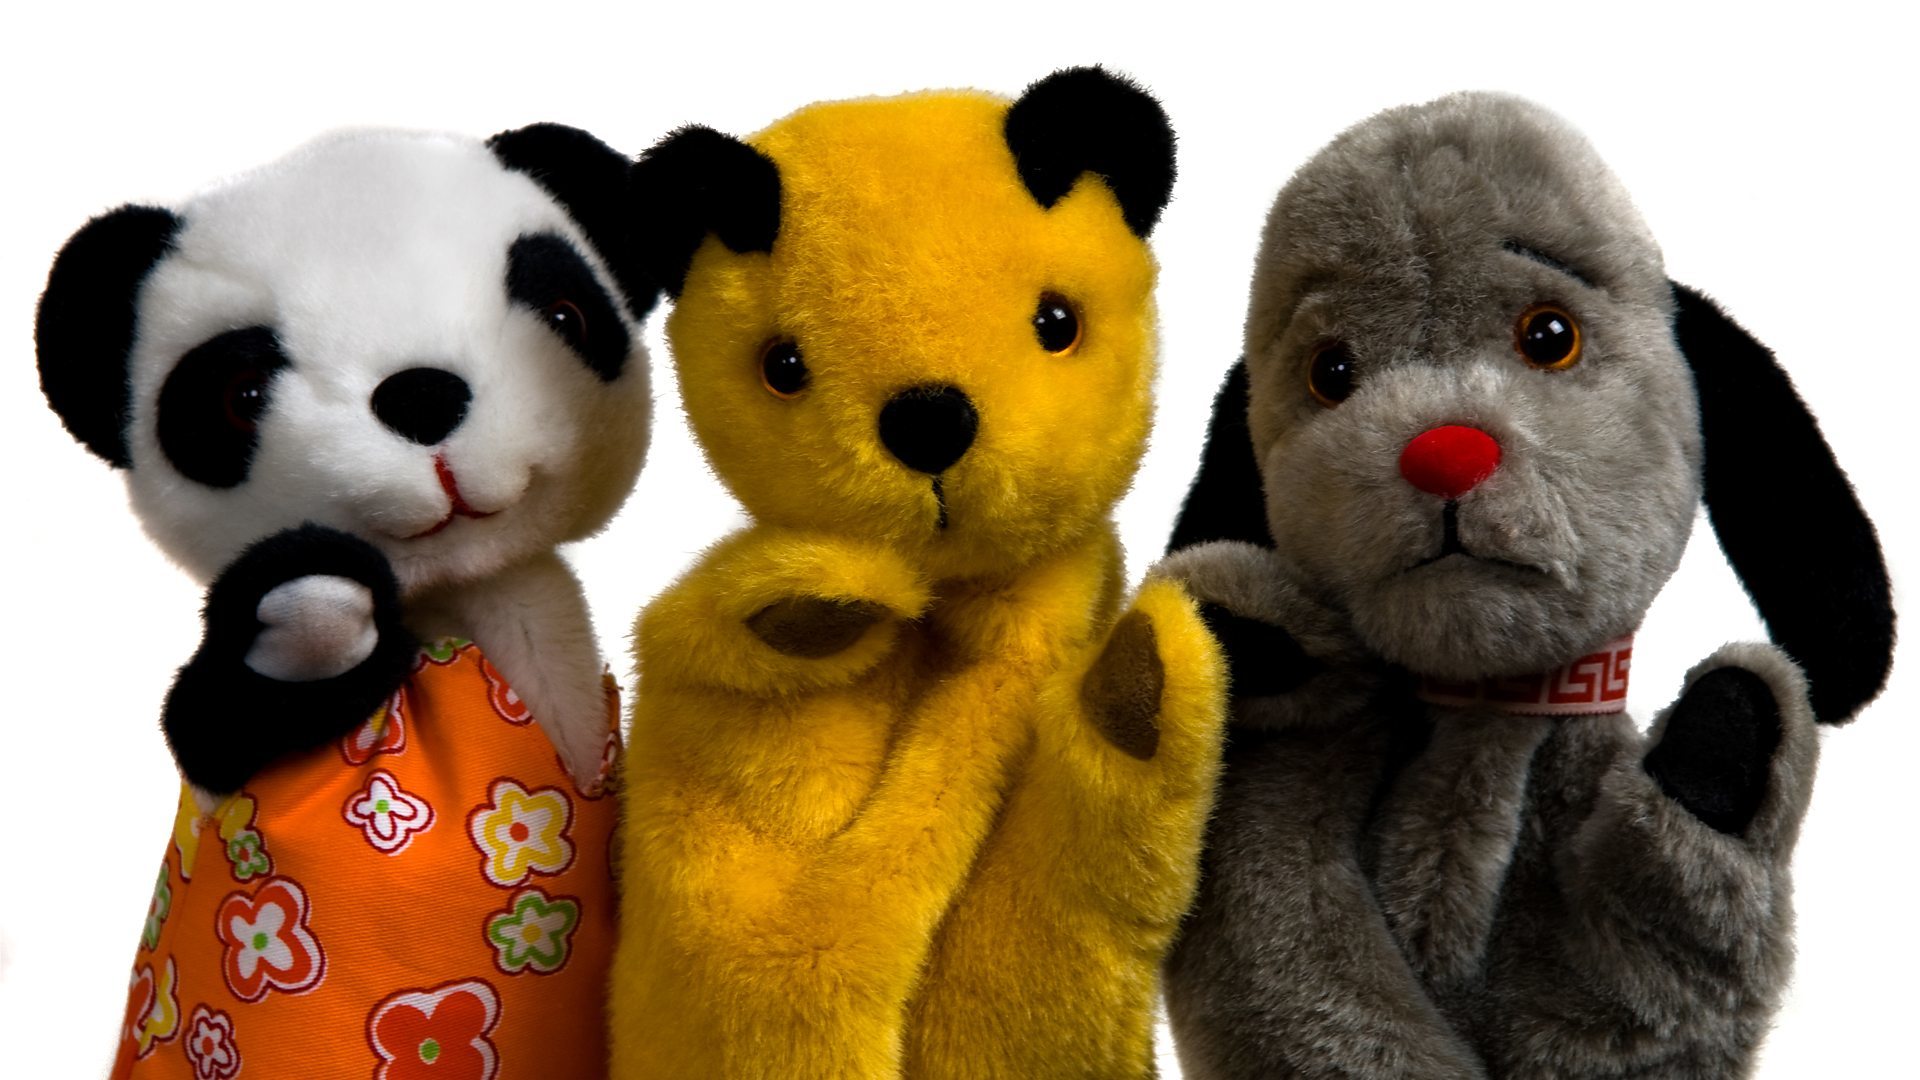 Mischievous old friends Sooty, Sweep and Soo